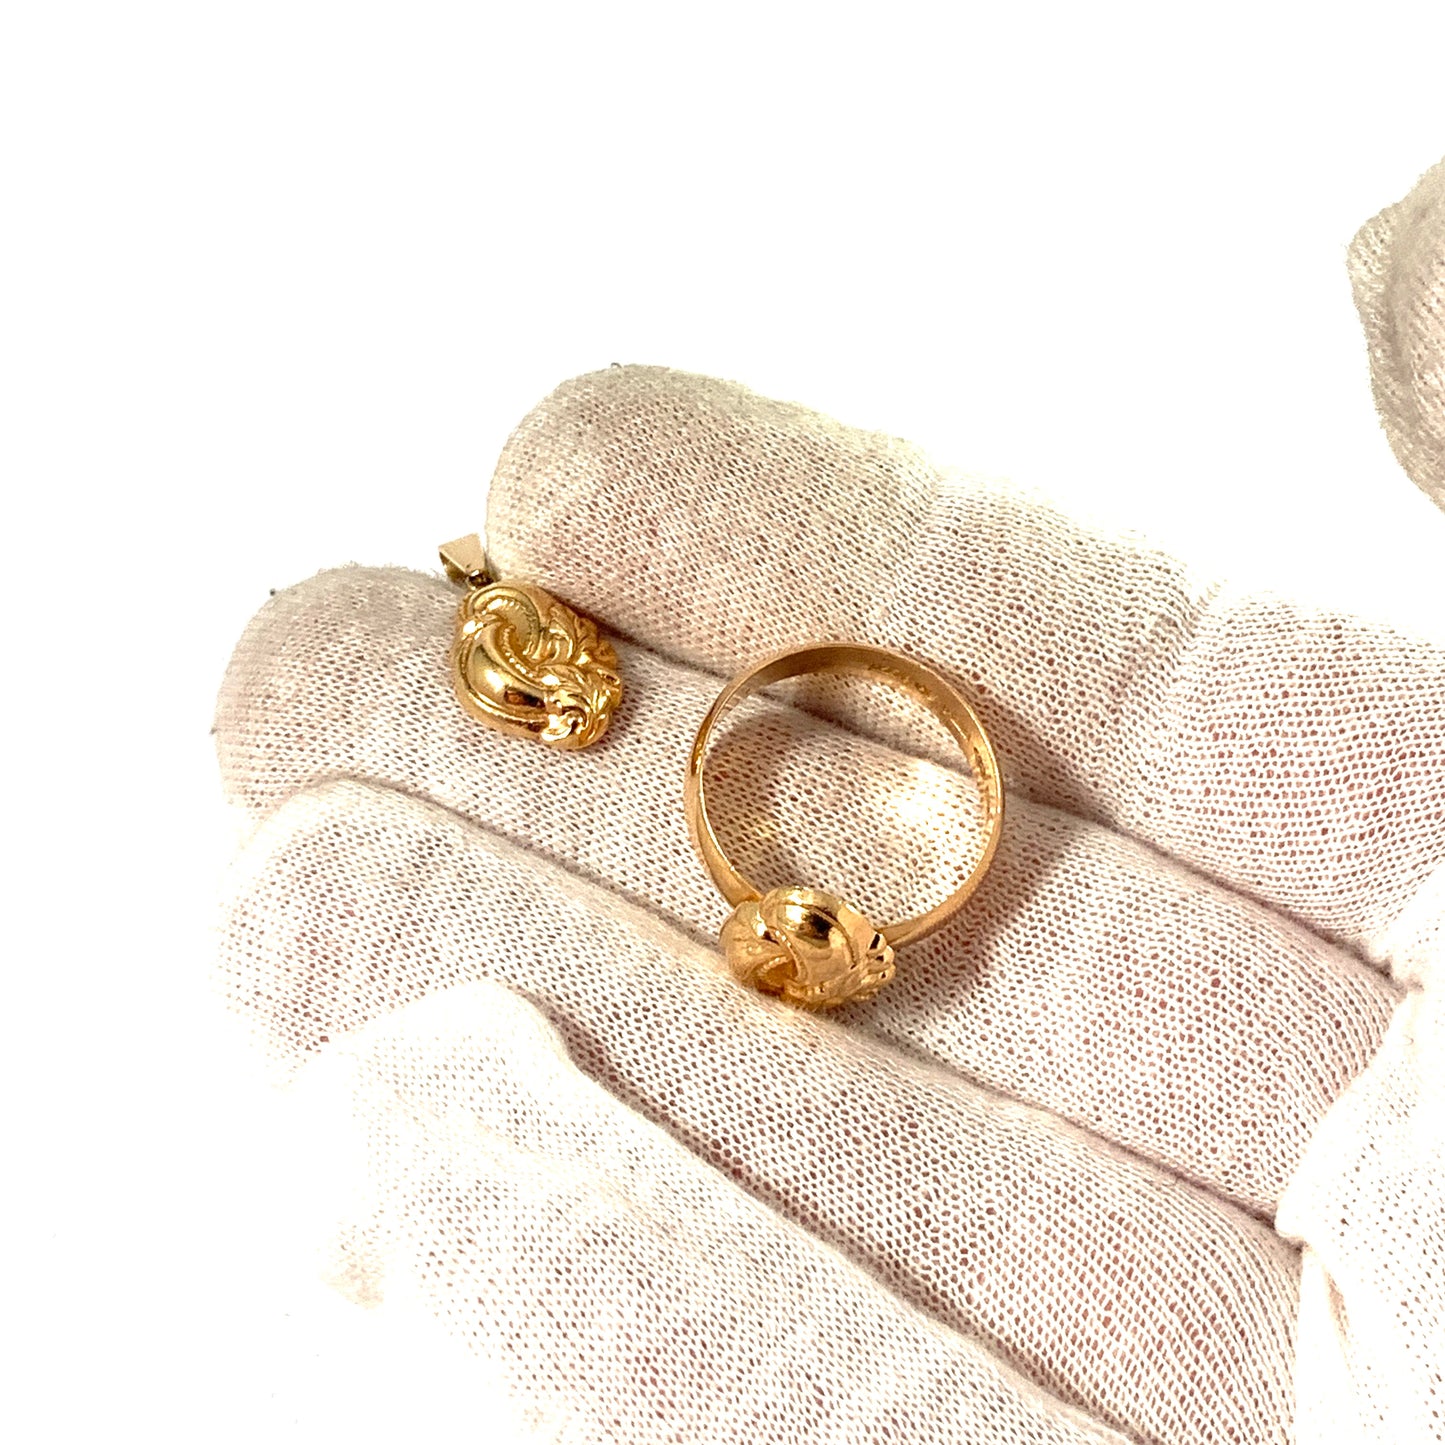 Carl Söderqvist, Sweden year 1900, Antique 18k Gold Ring and small Pendant.